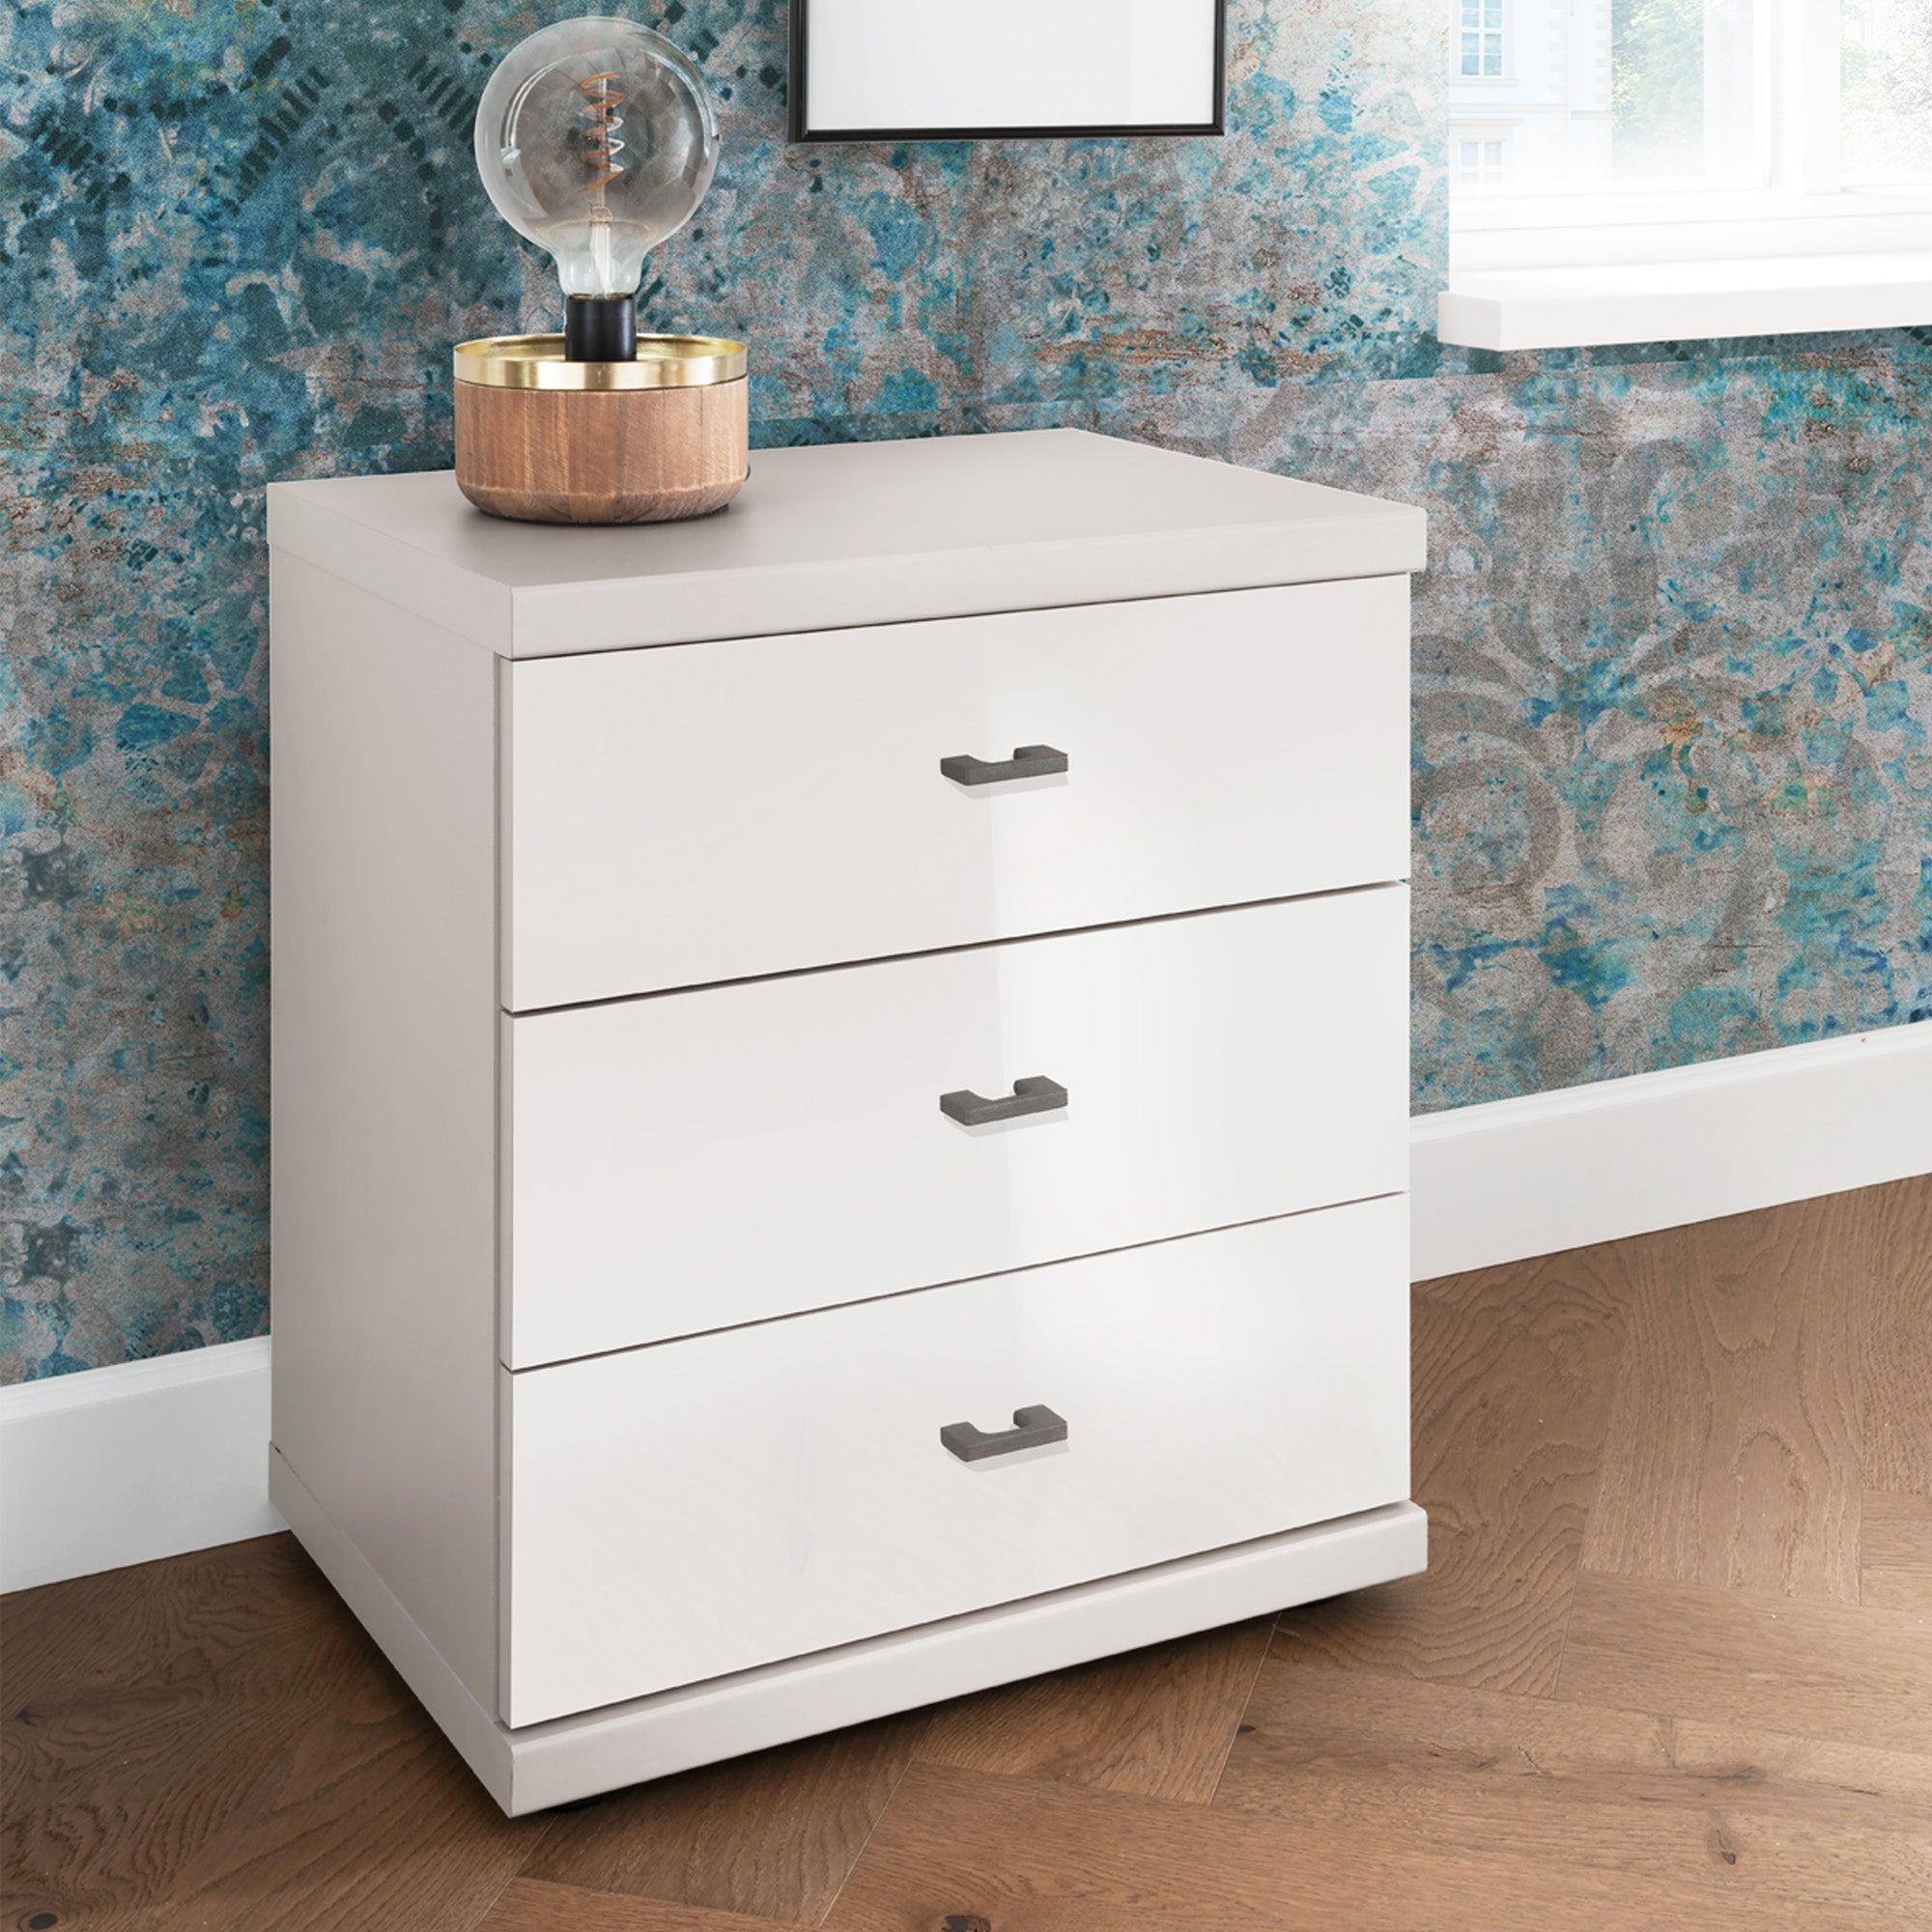 Lauderdale - Pair of 3 Drawer Bedside Cabinets With Glass Front